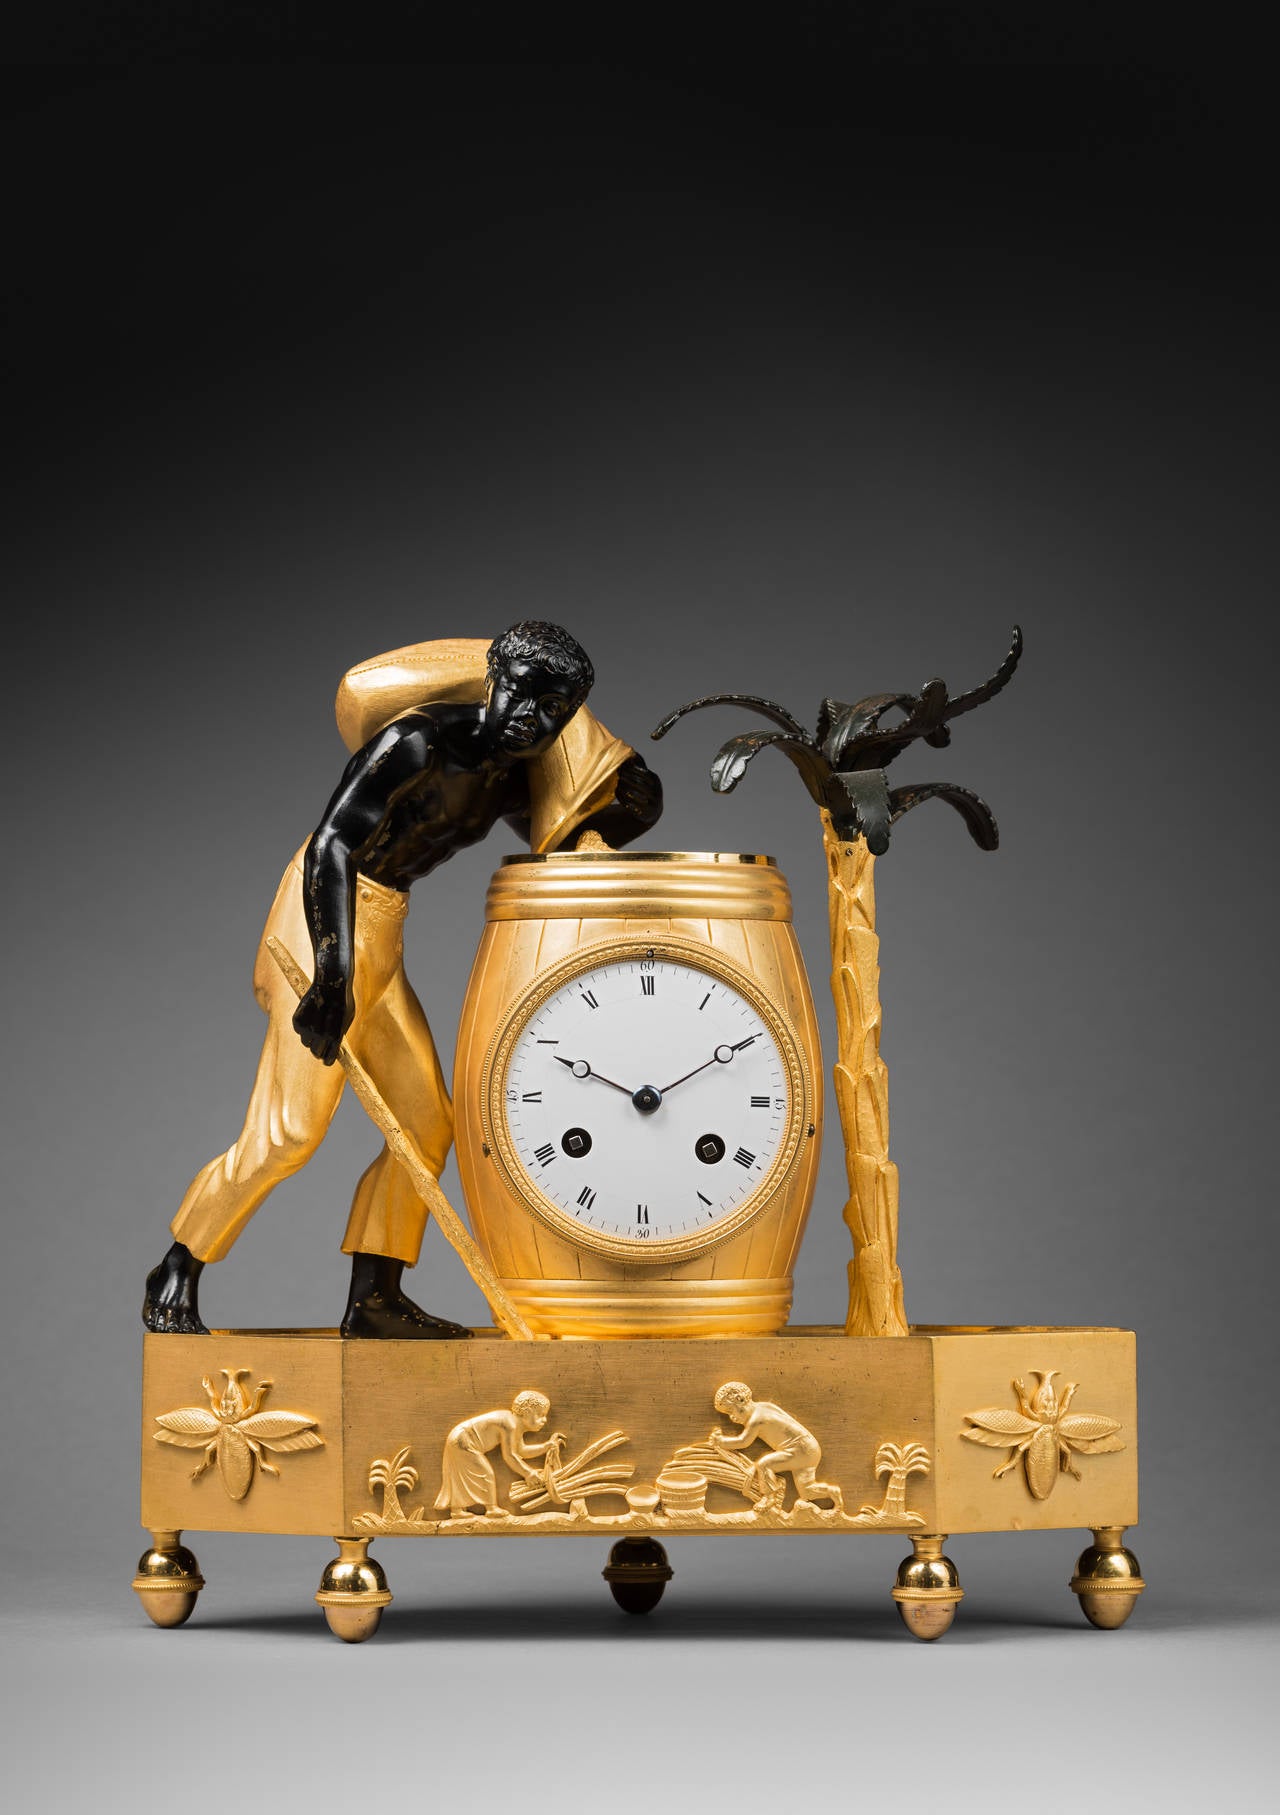 Model Attributed to Louis-Simon Deverberie.

Fine chased, gilt and patinated bronze mantel clock 
“The Coffee Bearer” 

Paris, Directoire period, circa 1795-1800. 
Dimensions: Height 29 cm; width 29 cm; depth 9.5 cm.

The round enamel dial